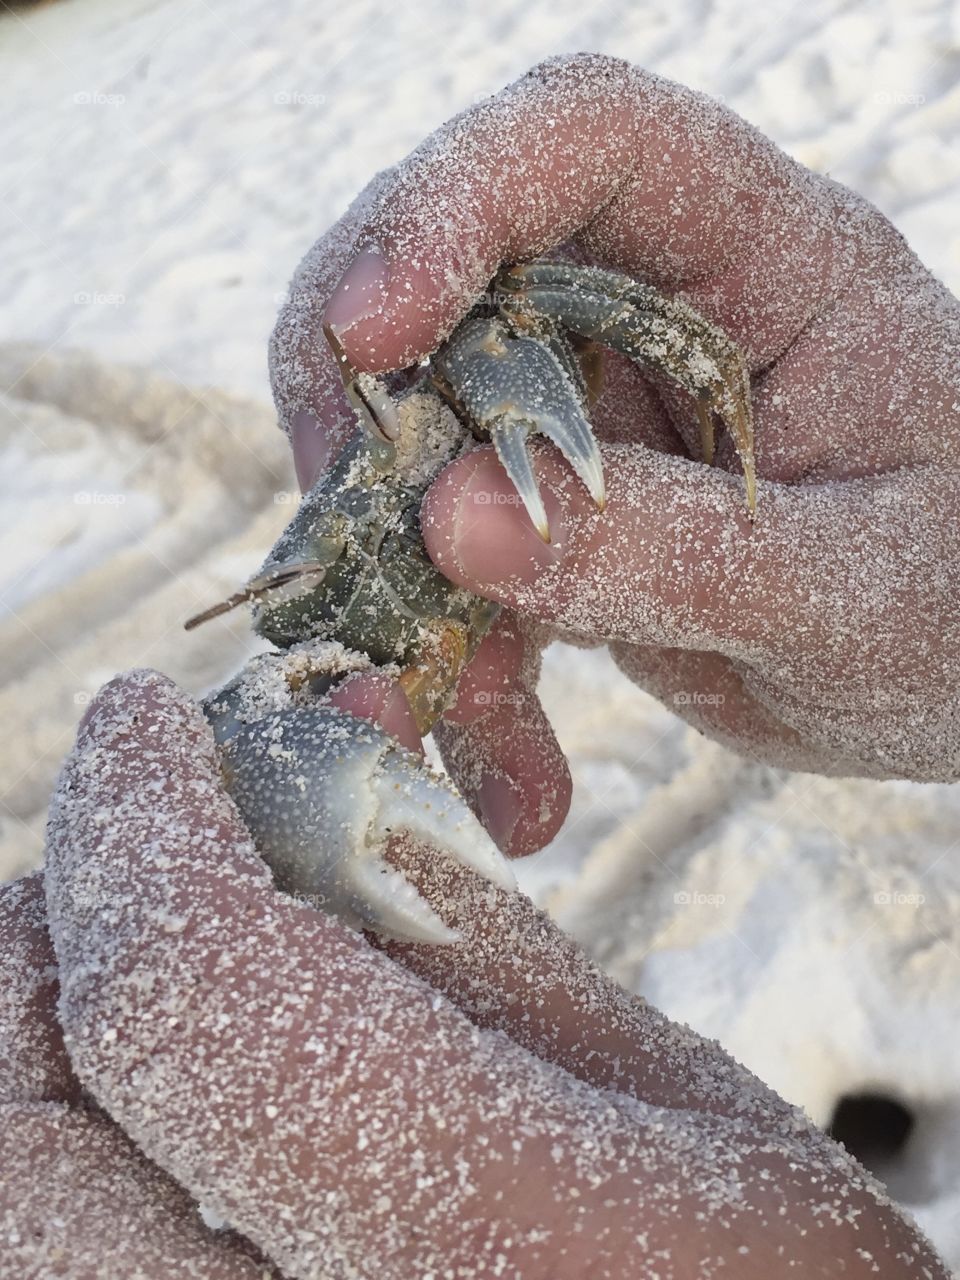 A small green crab with claws in the sand, in the hands of a man